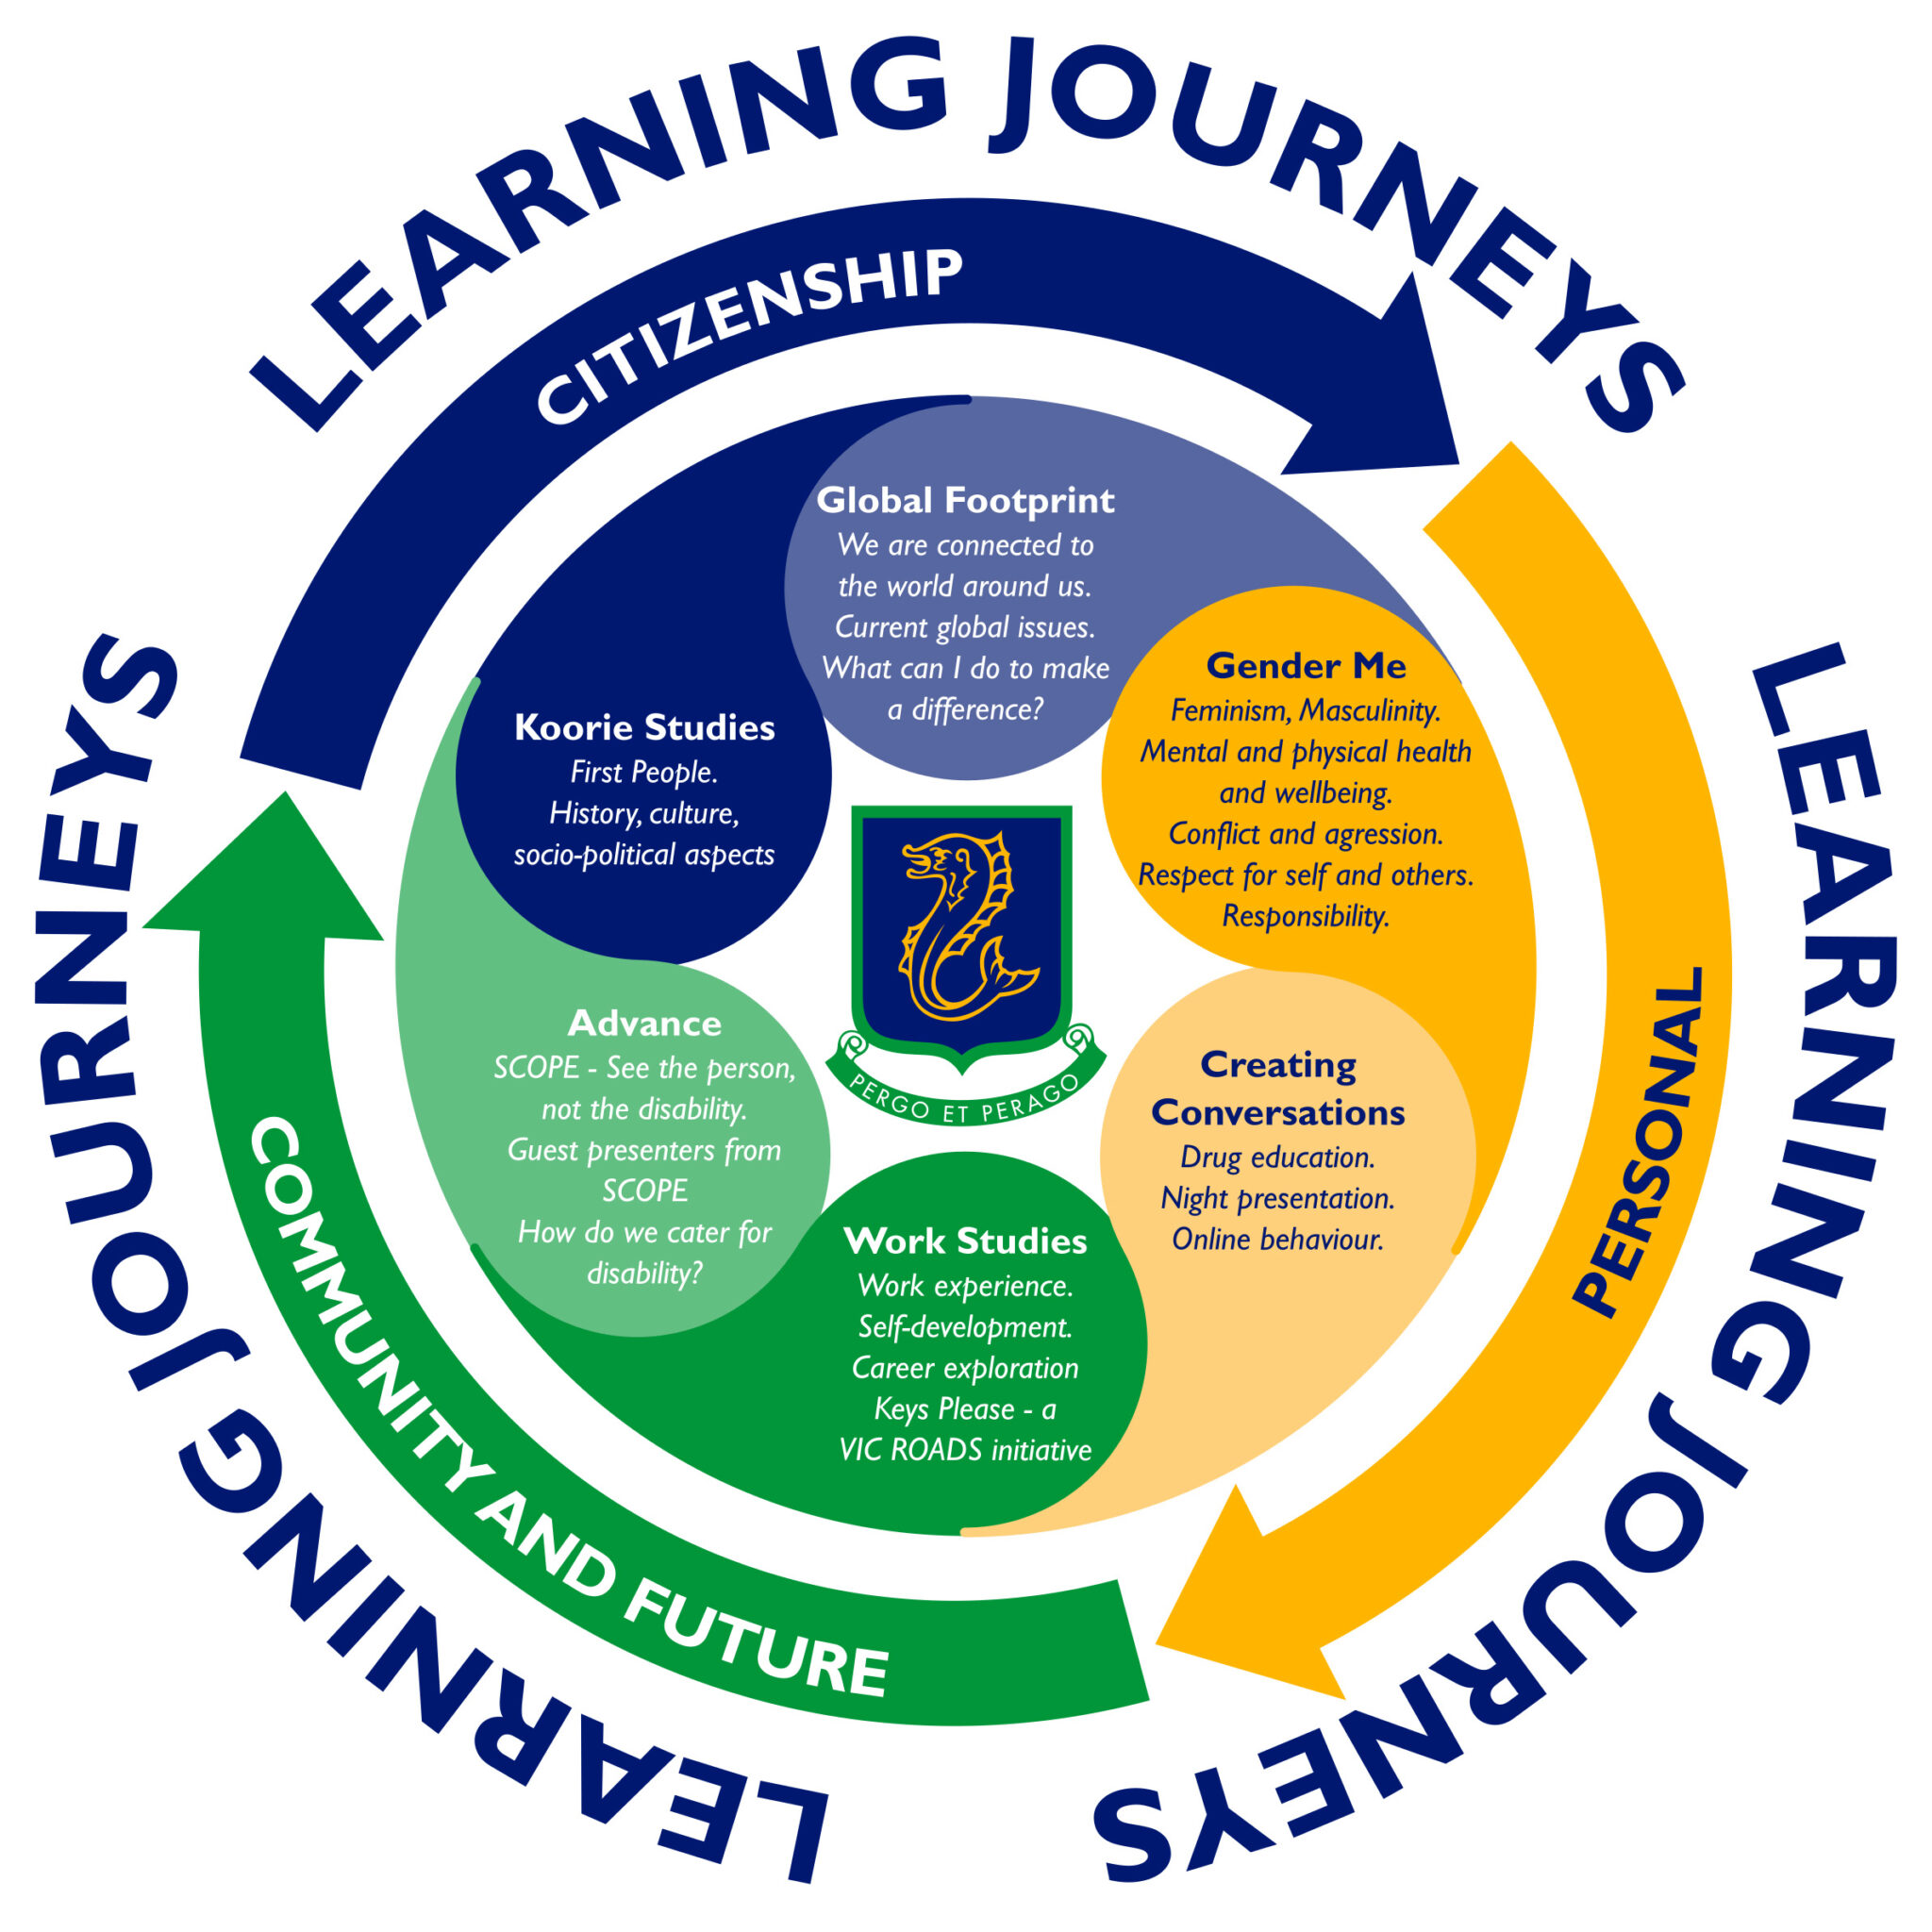 ideal learning journey